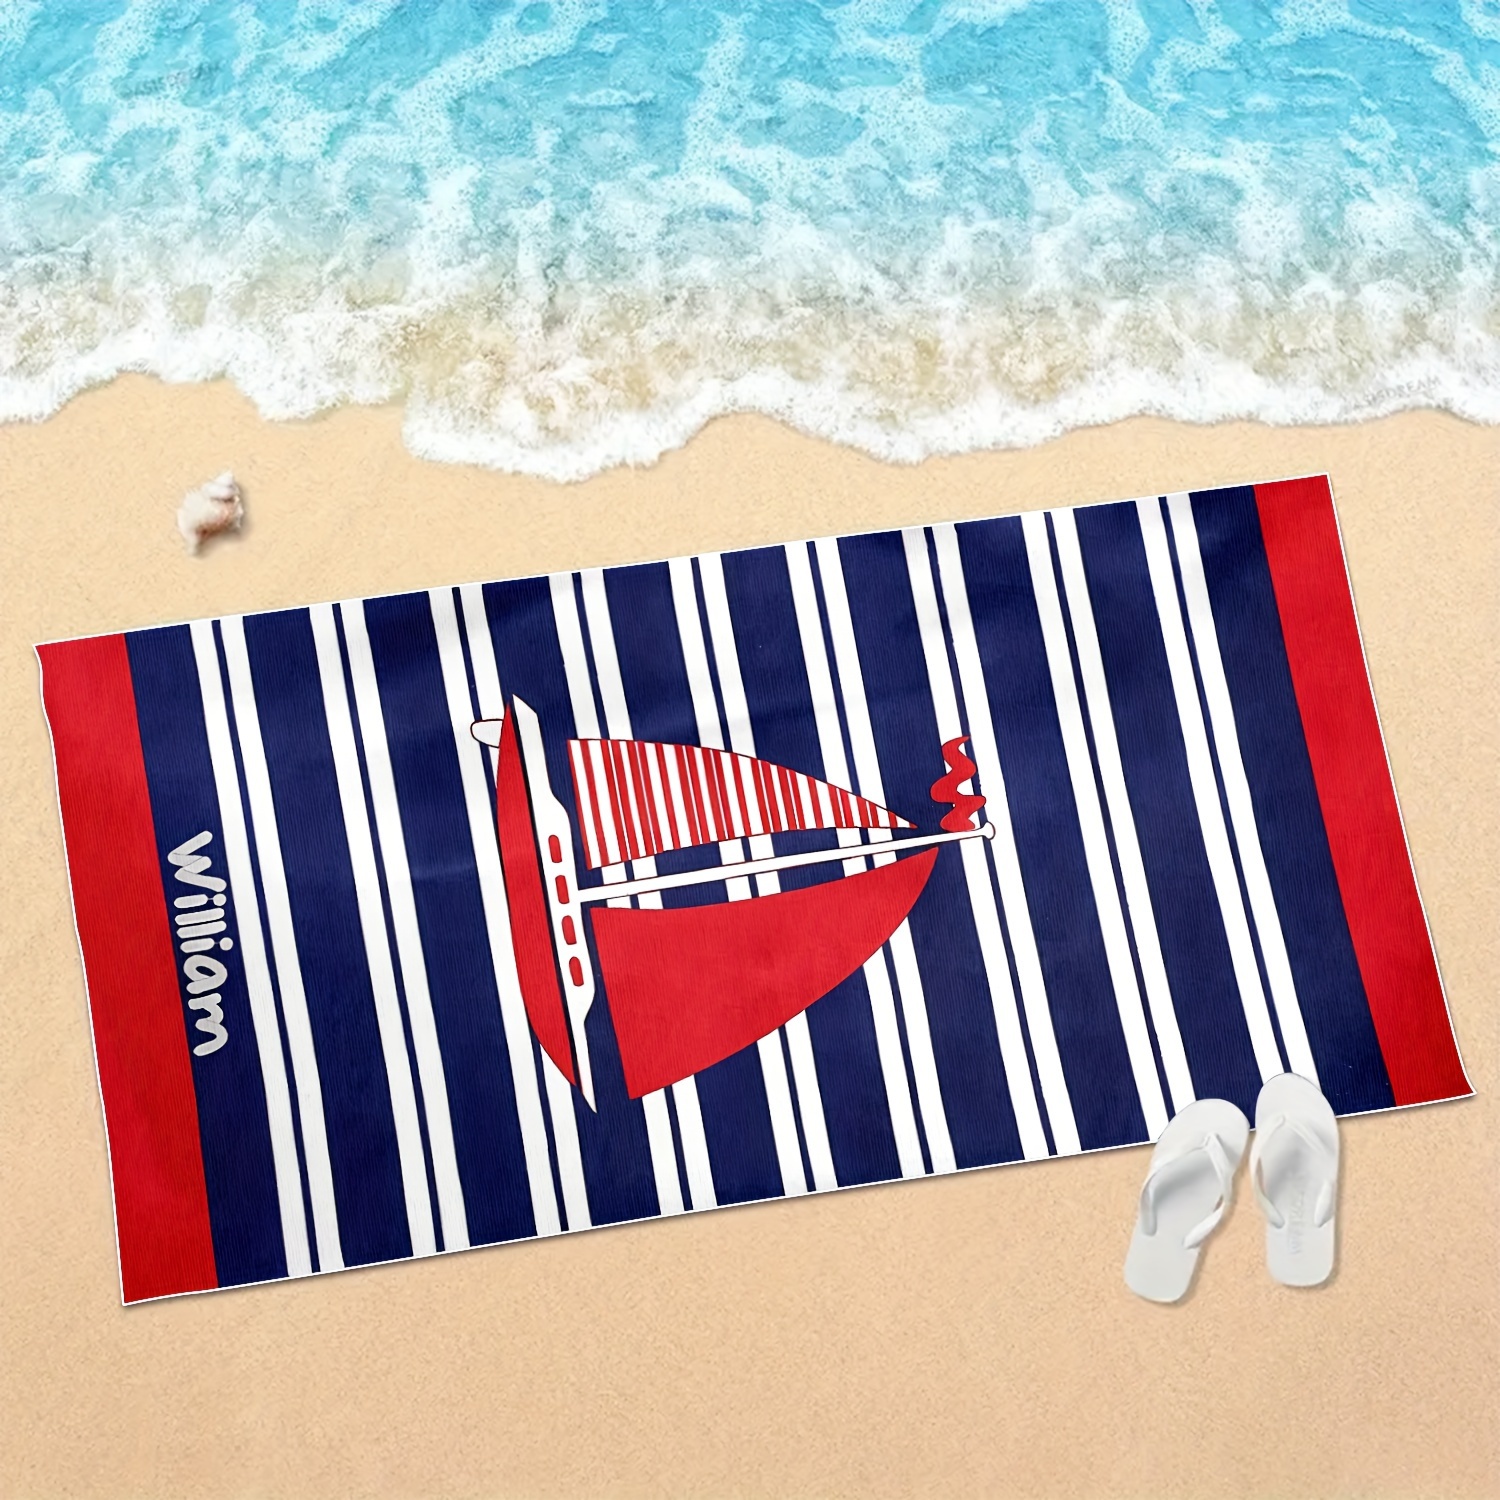 

Extra Large Striped Beach Towel - Super Absorbent, Quick-dry & Soft Microfiber, Sand-free For Pool, Swim, Bath, Travel & Camping